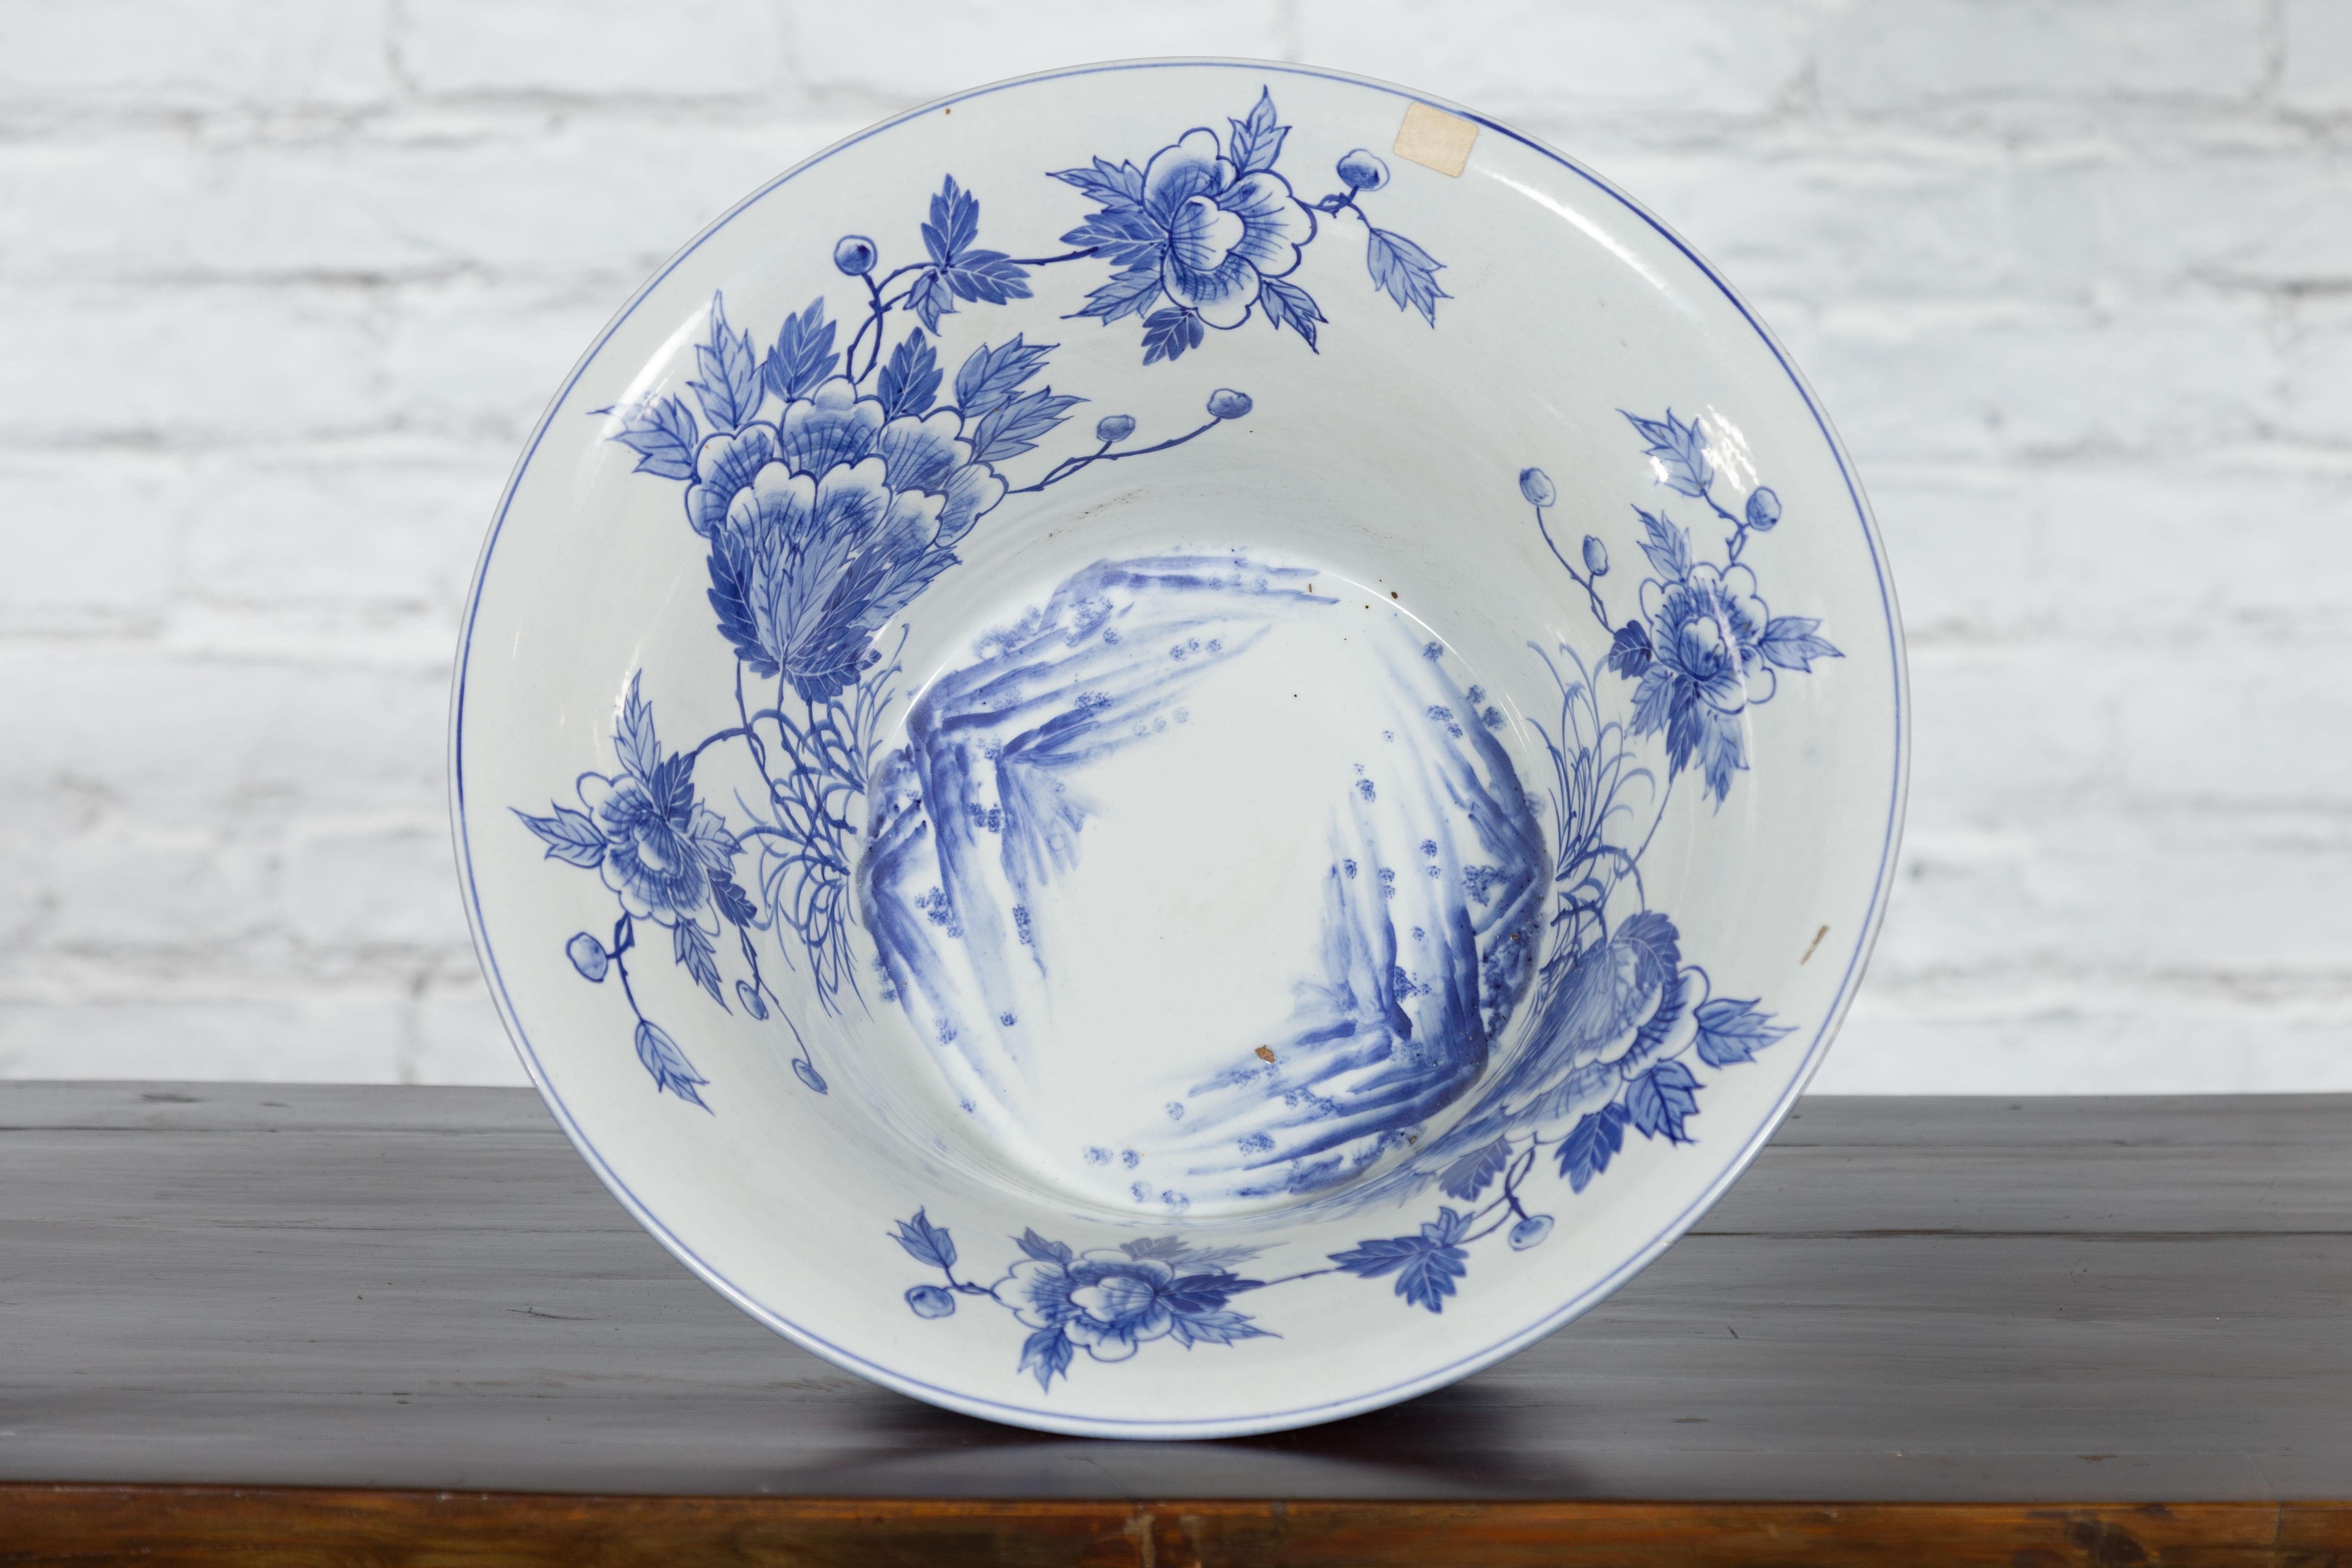 Chinese Blue and White Porcelain Wash Basin with Floral Motifs and Cobalt Blue For Sale 10